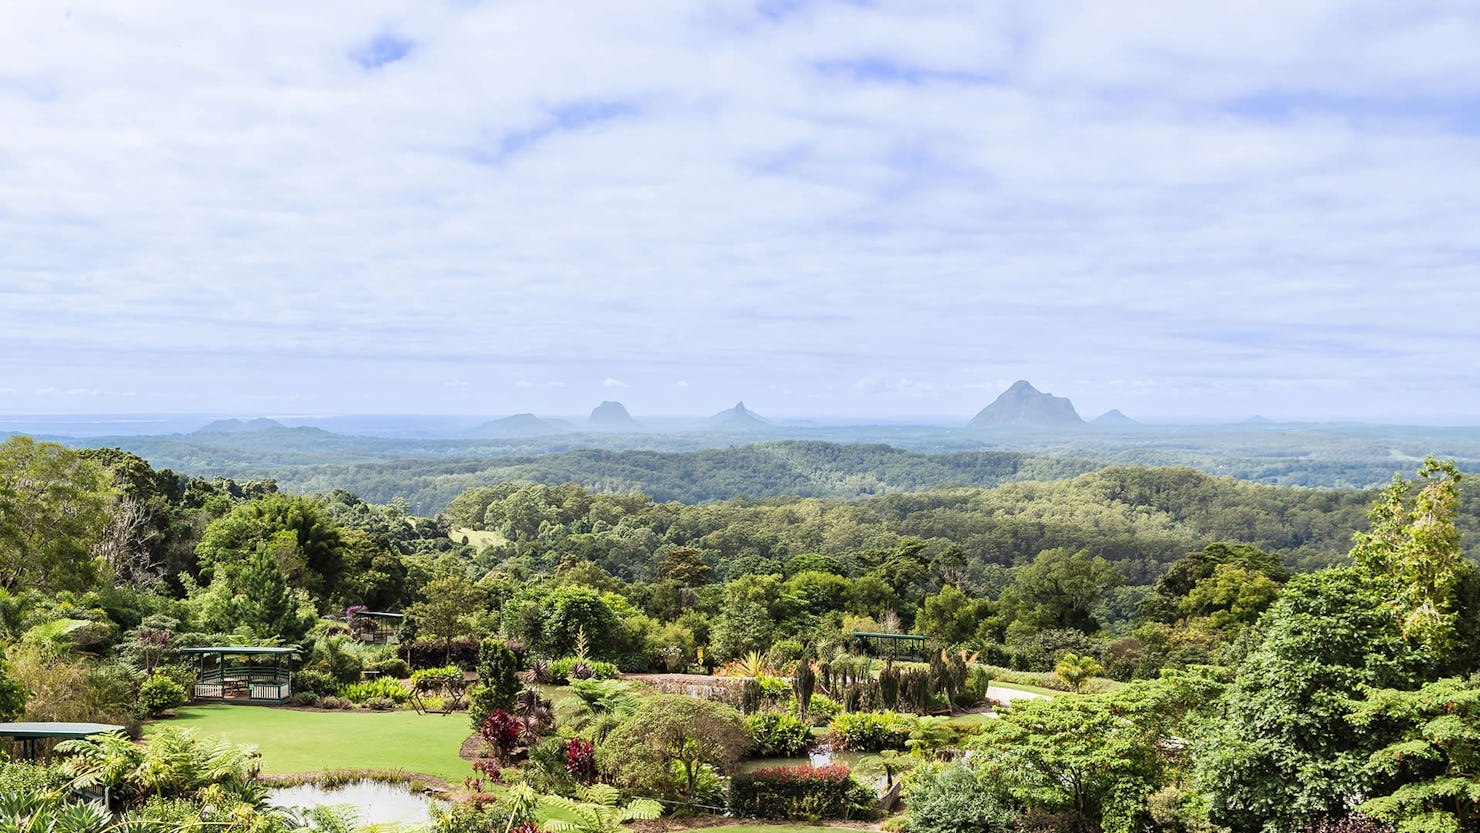 The picturesque Maleny Botanic Gardens and Bird World